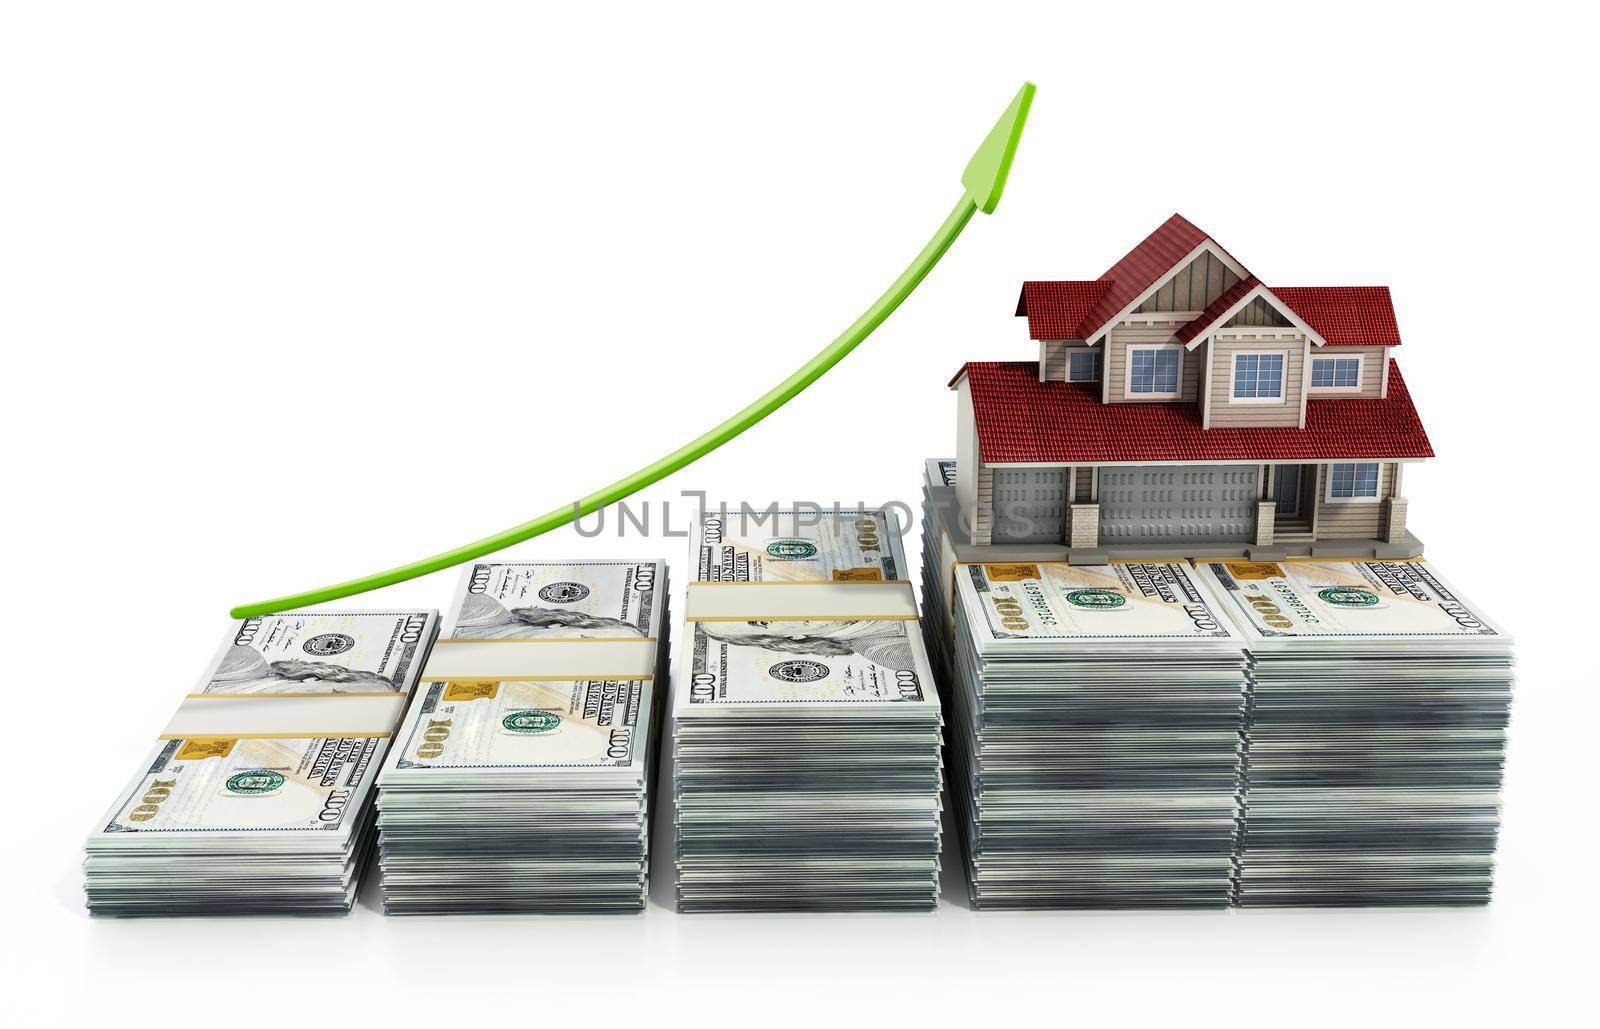 Luxury house standing on top of dollar bills. Rising house prices concept. 3D illustration.